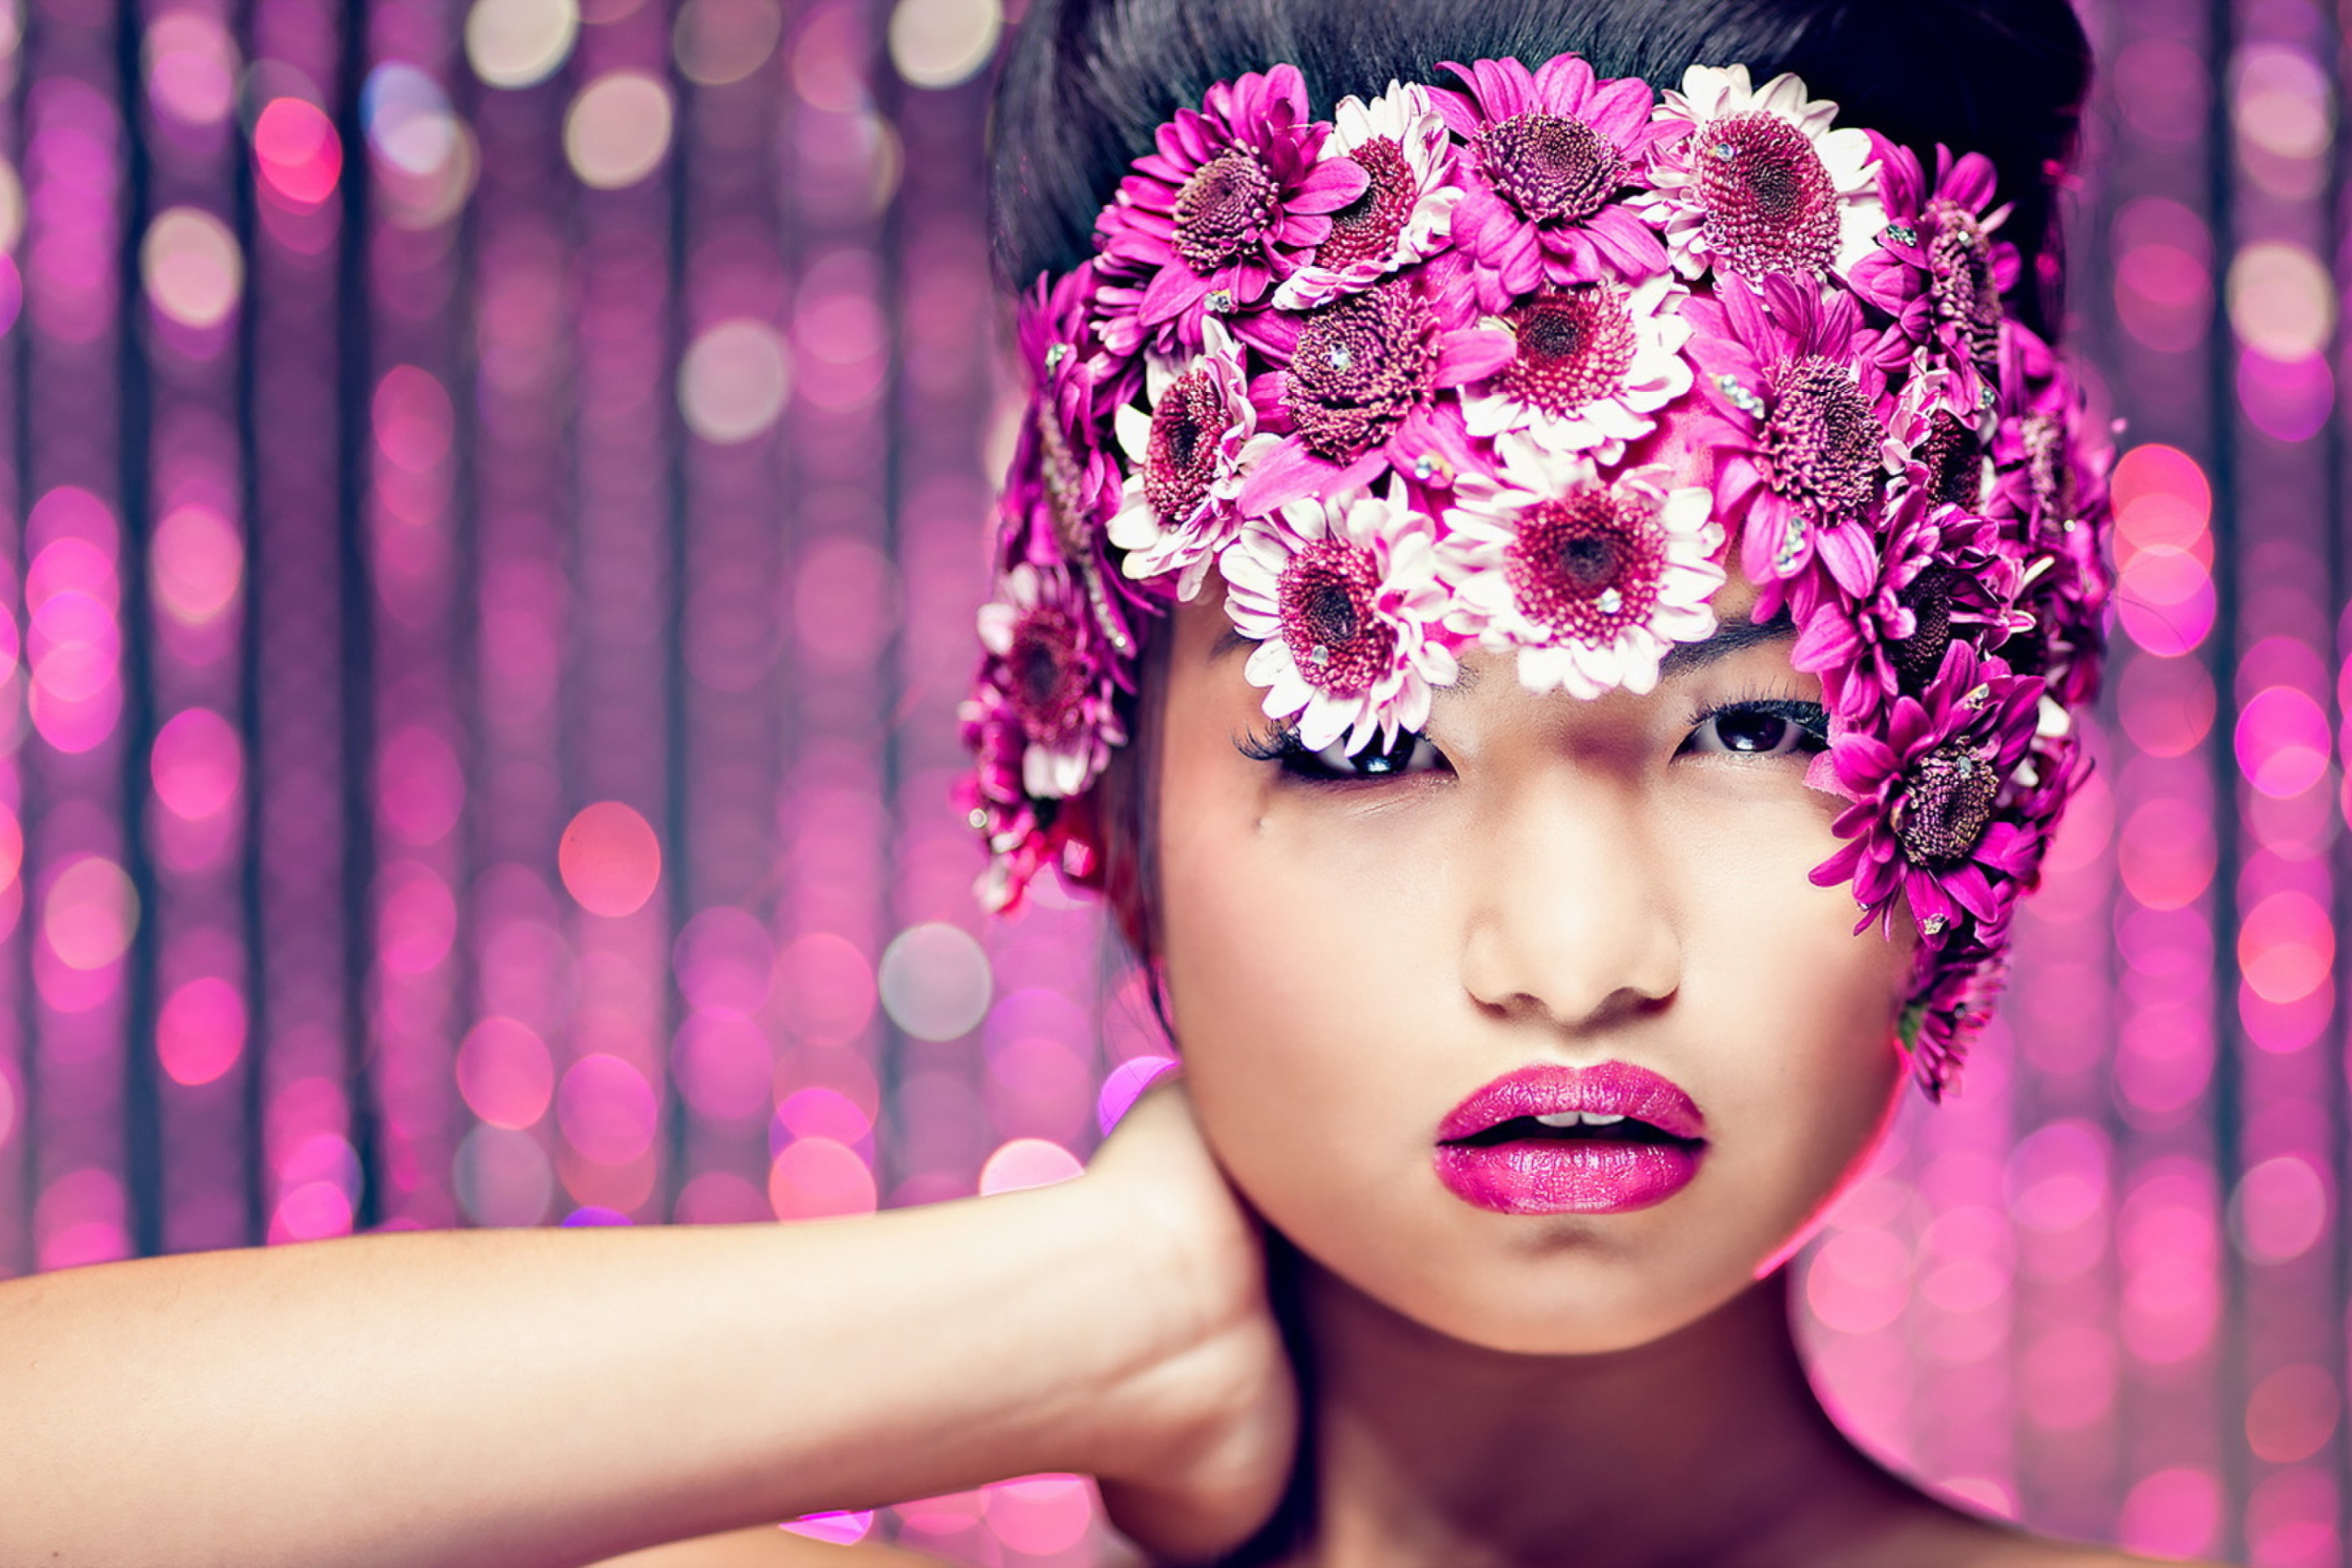 Asian Fashion Model With Pink Flower Wreath wallpaper 2880x1920